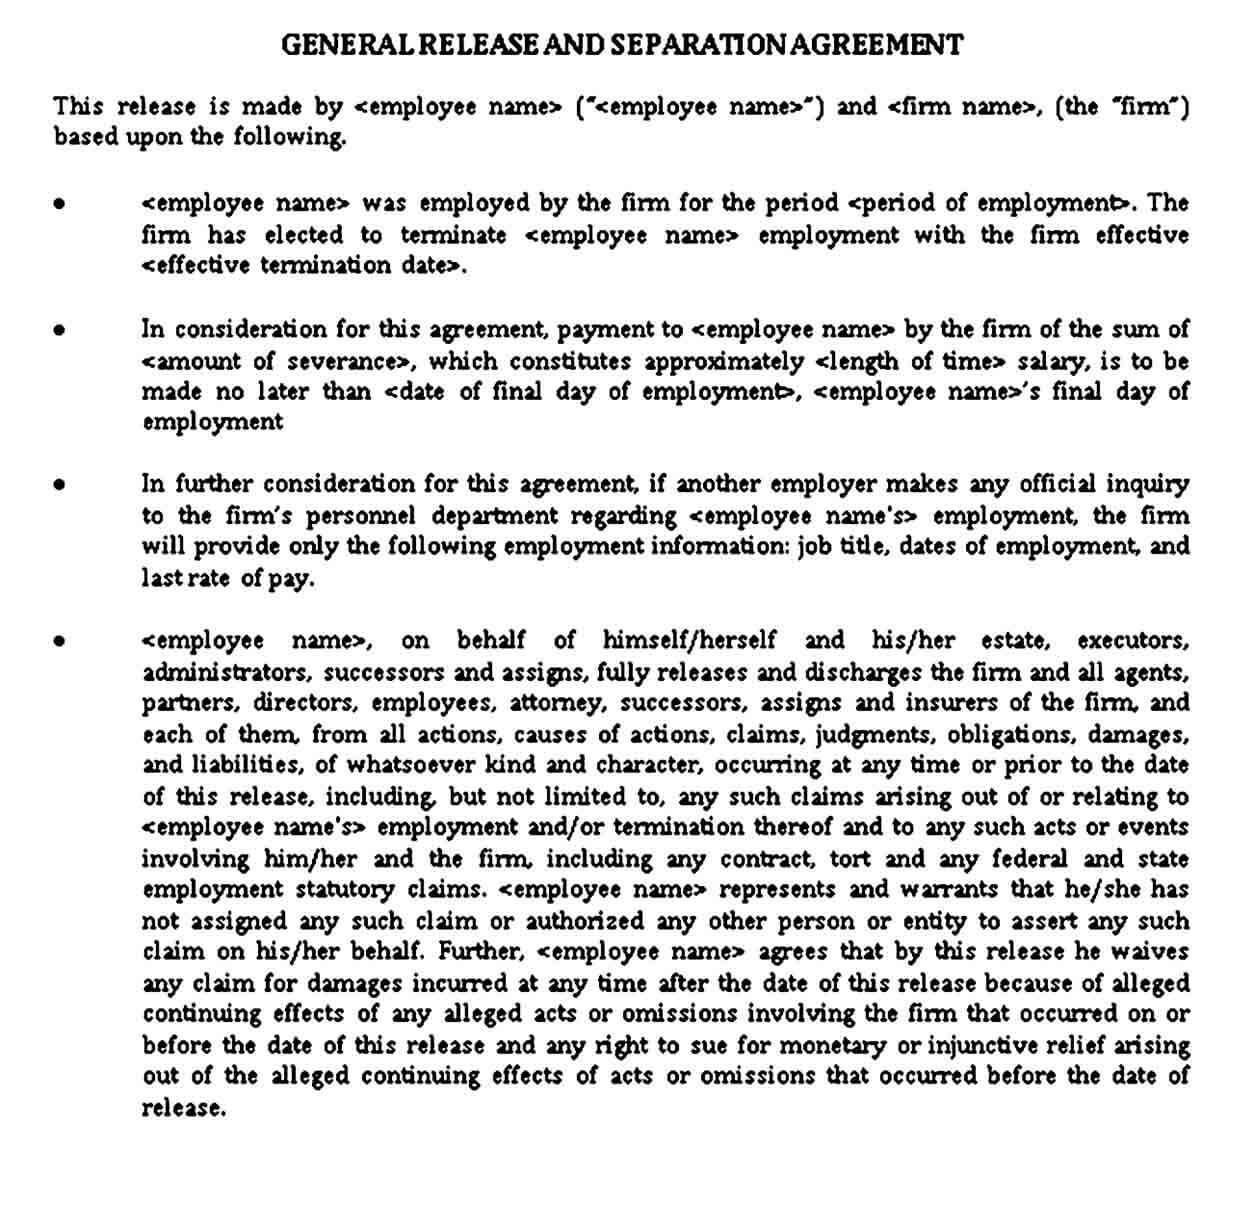 General Release and Separation Agreement